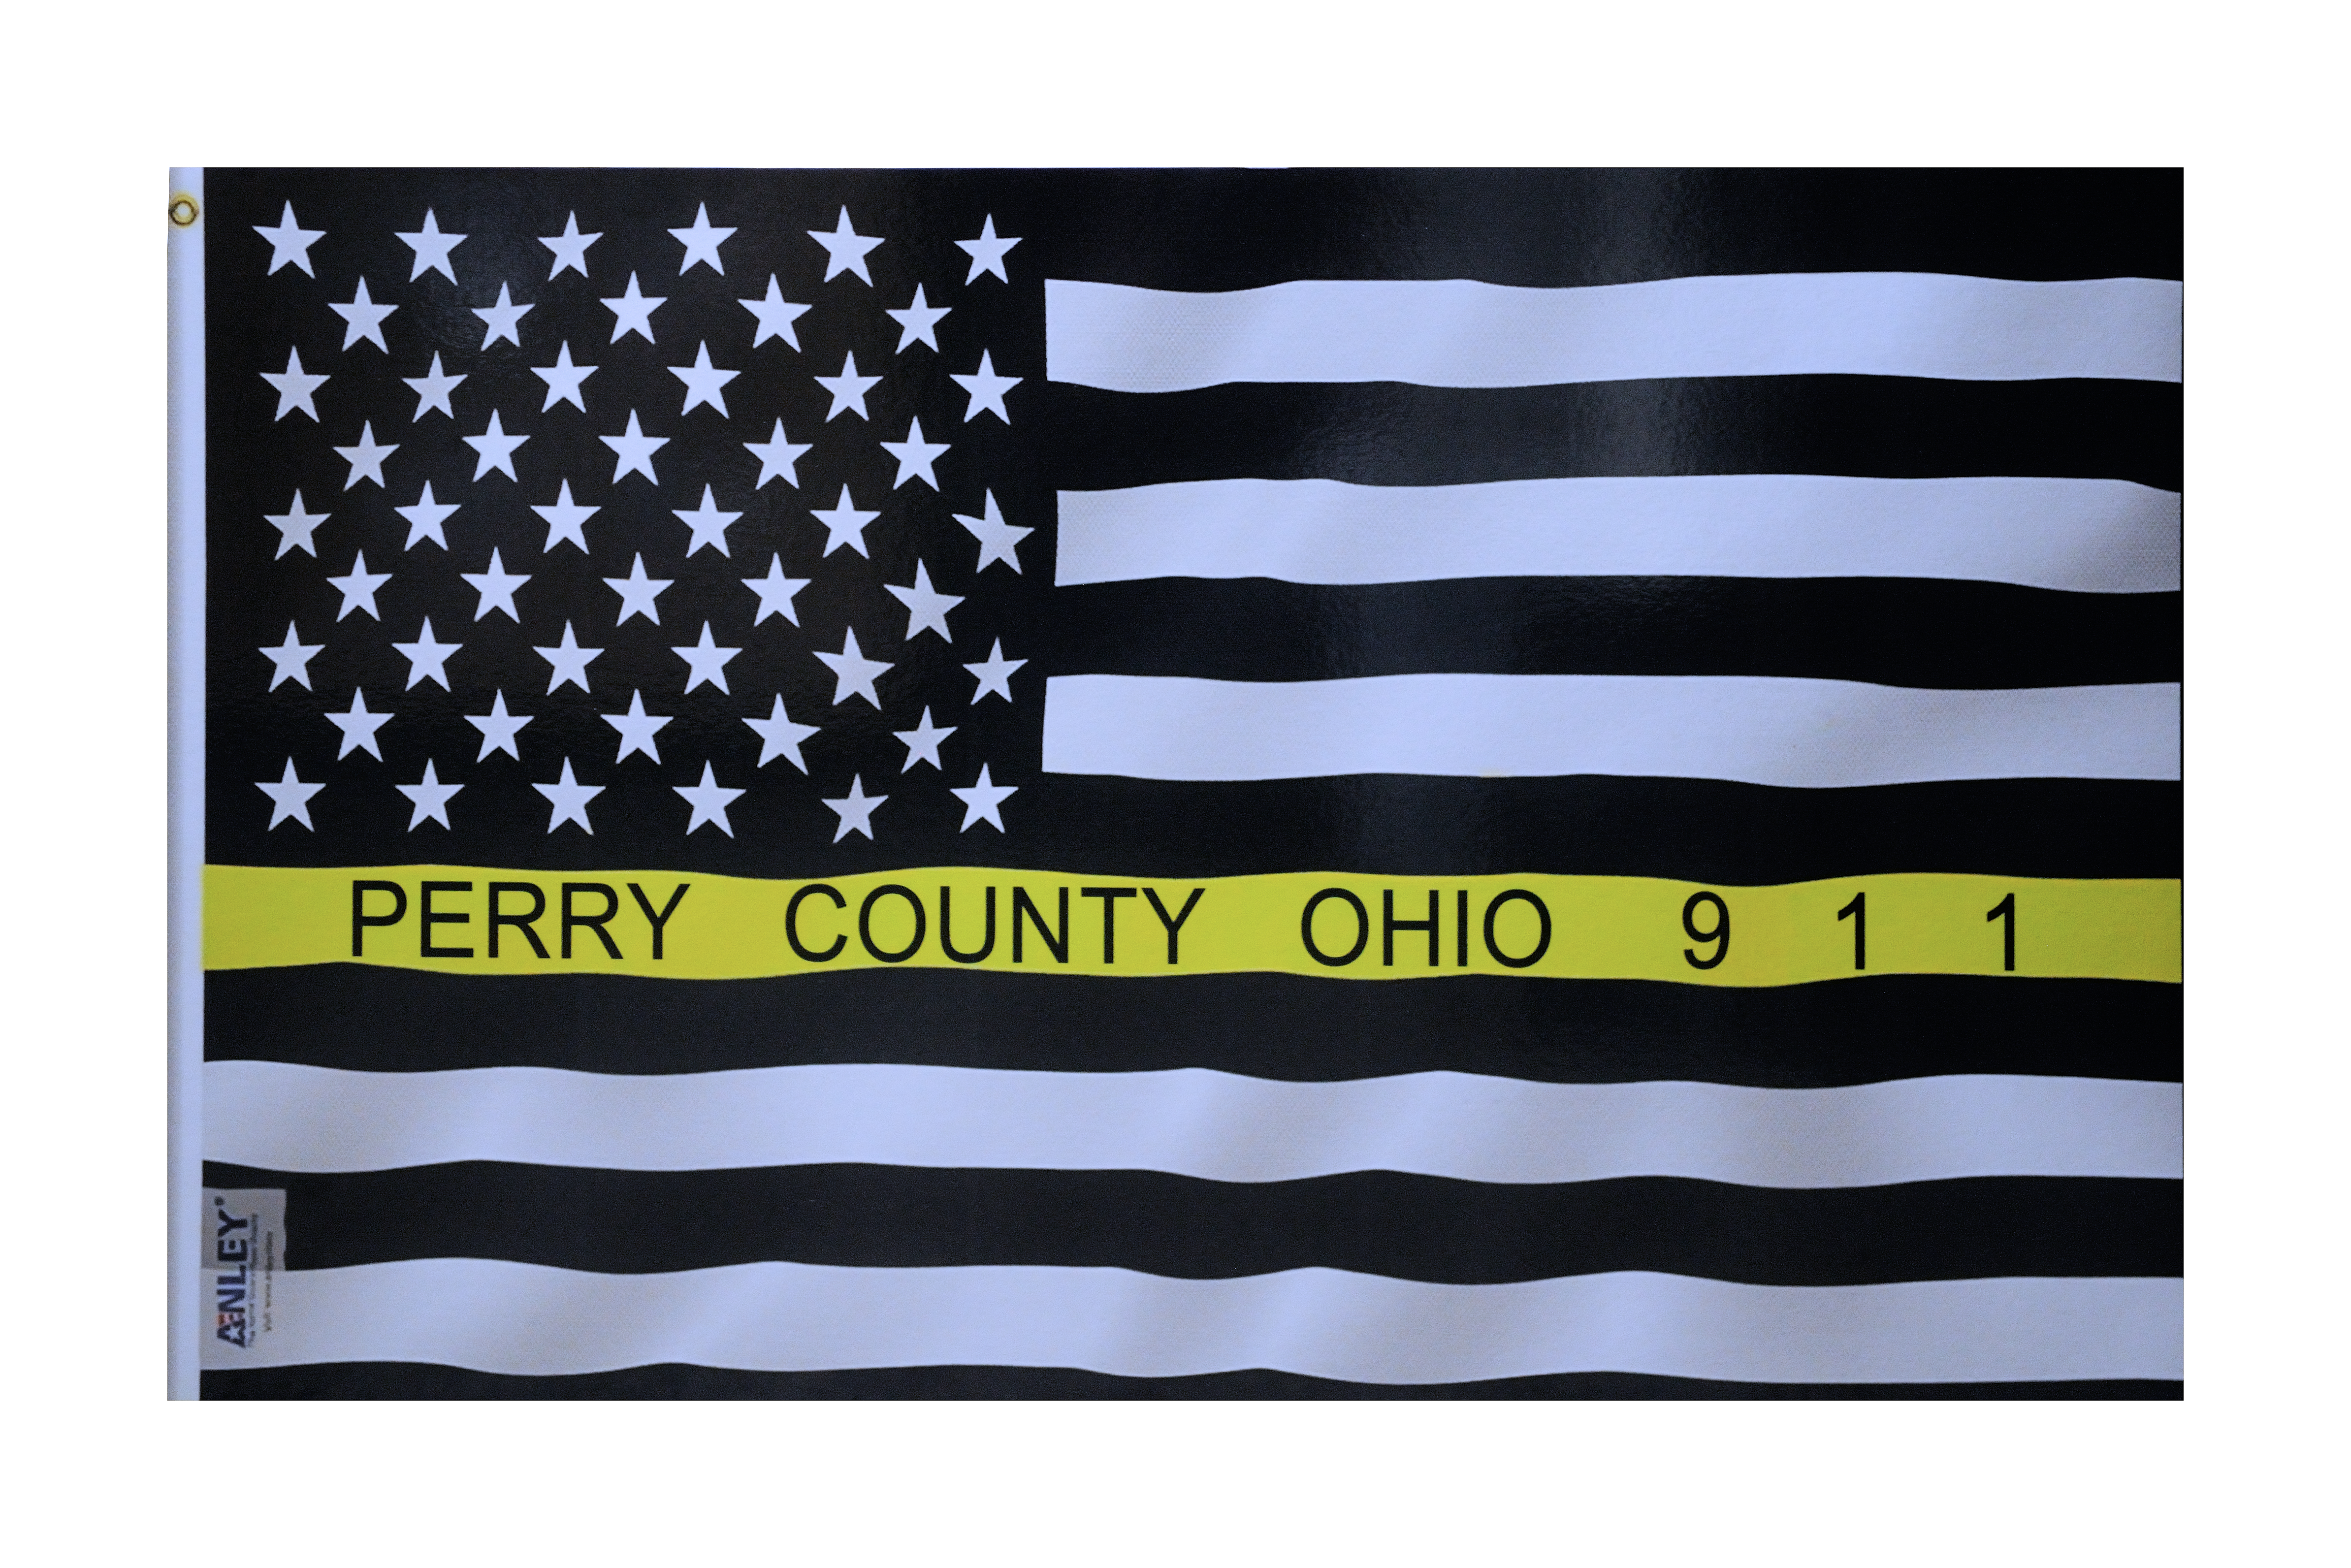 *** DRAFT *** Perry County Public Safety Communications Plan | March 2021 ***DRAFT***